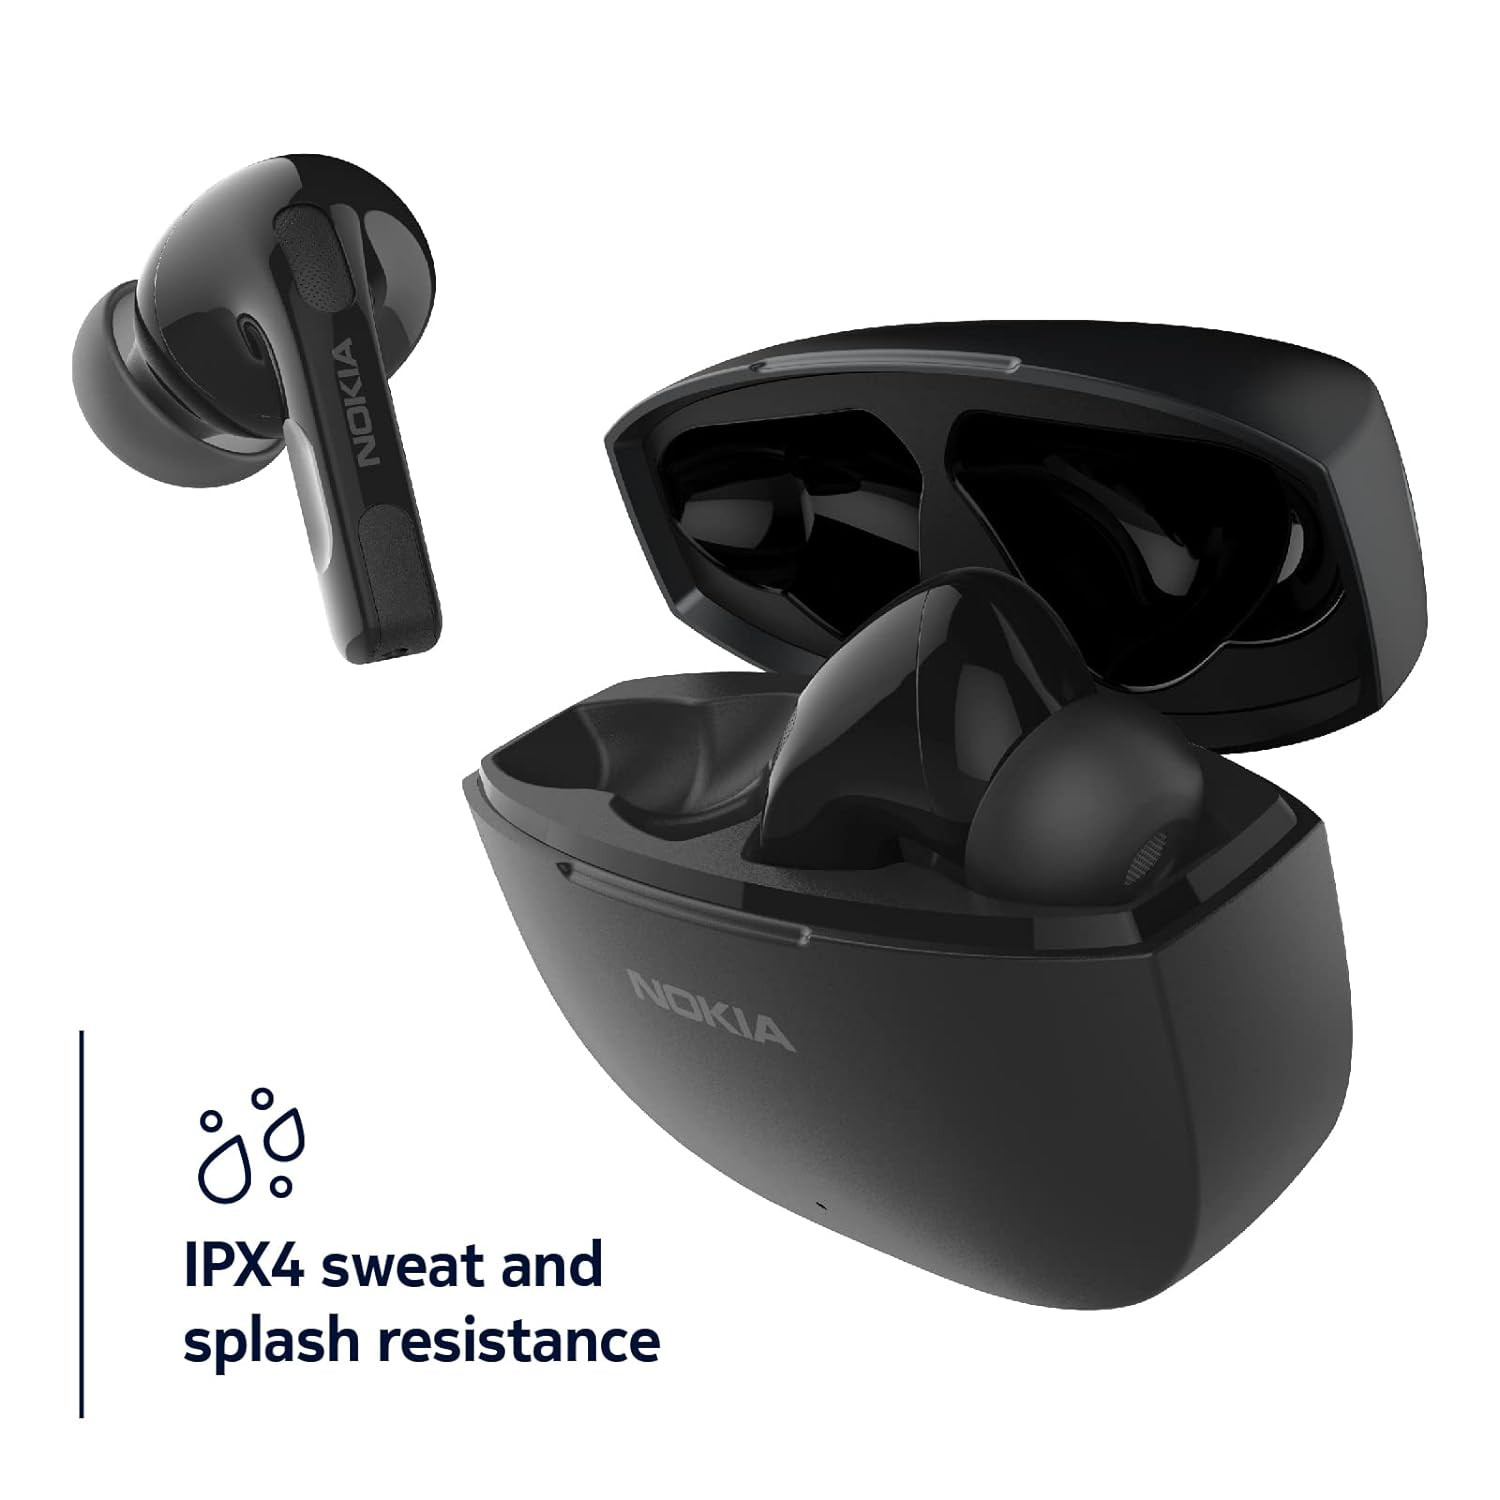 Nokia Go Earbuds+ True Wireless Earbuds TWS-201 (Black) - Portable Bluetooth 5.0 in-Ear Headphones with Touch Control - Comfortable Fit, Voice Assistant-Enabled, 26 Hours Use with Charging Case